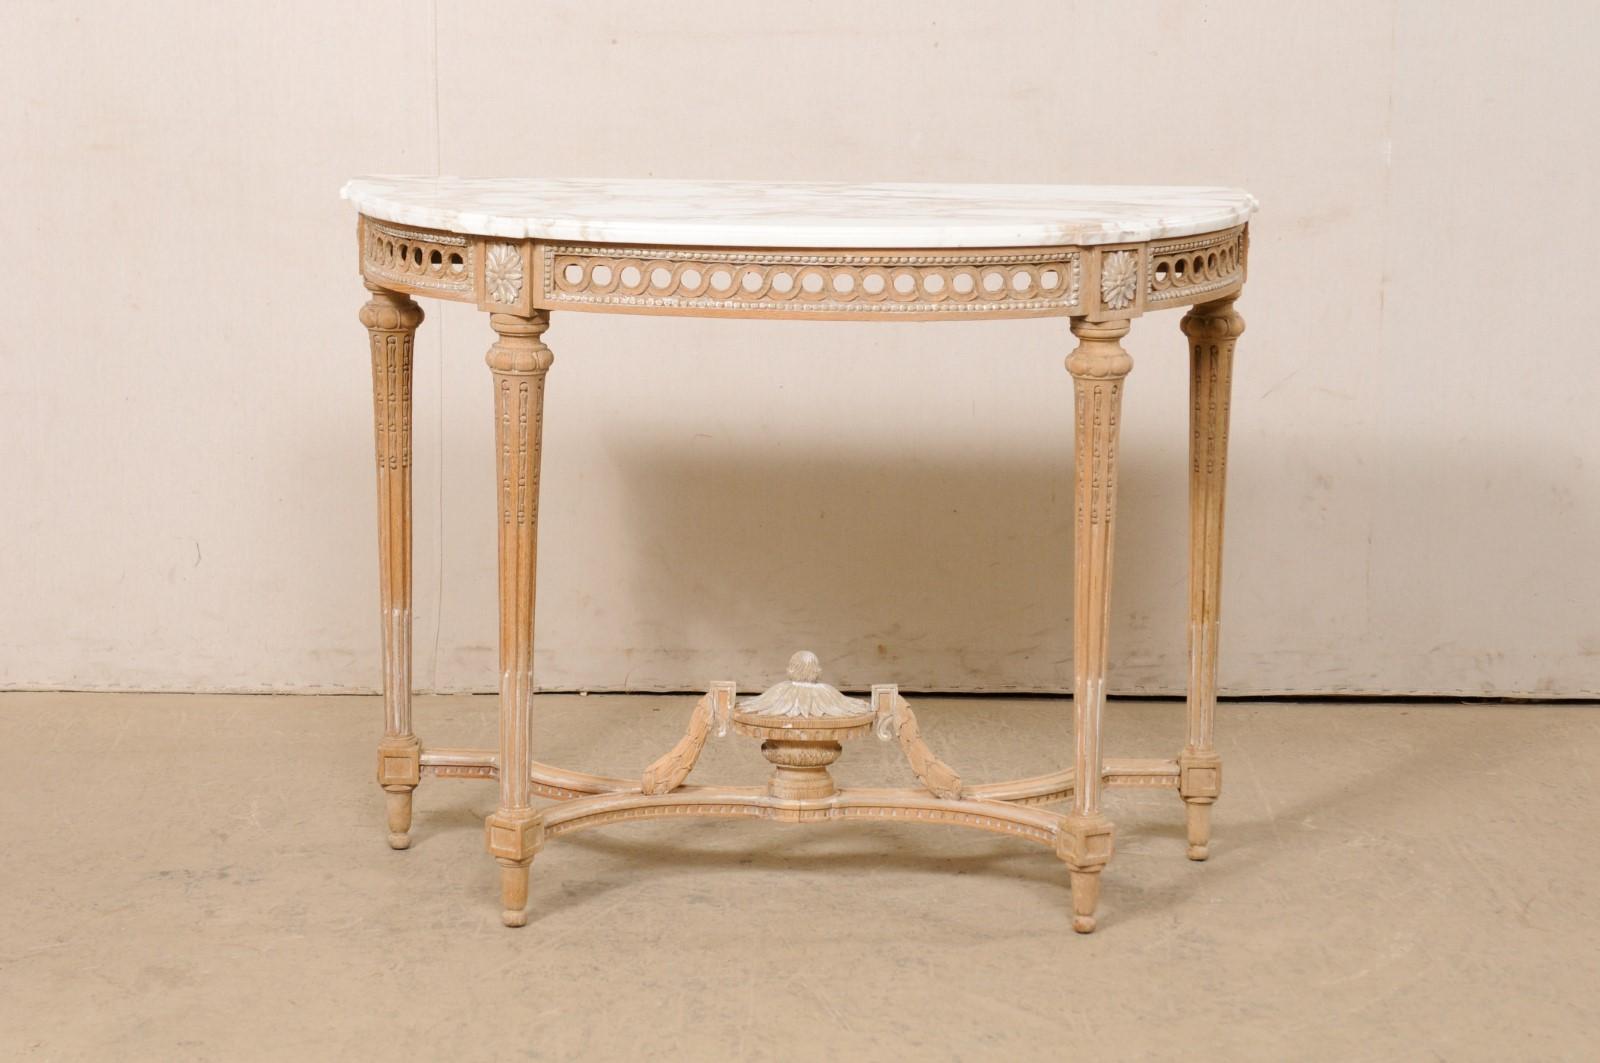 French Neoclassic Style Marble-Top Console Table W/Nice Urn Finial at Underside For Sale 7